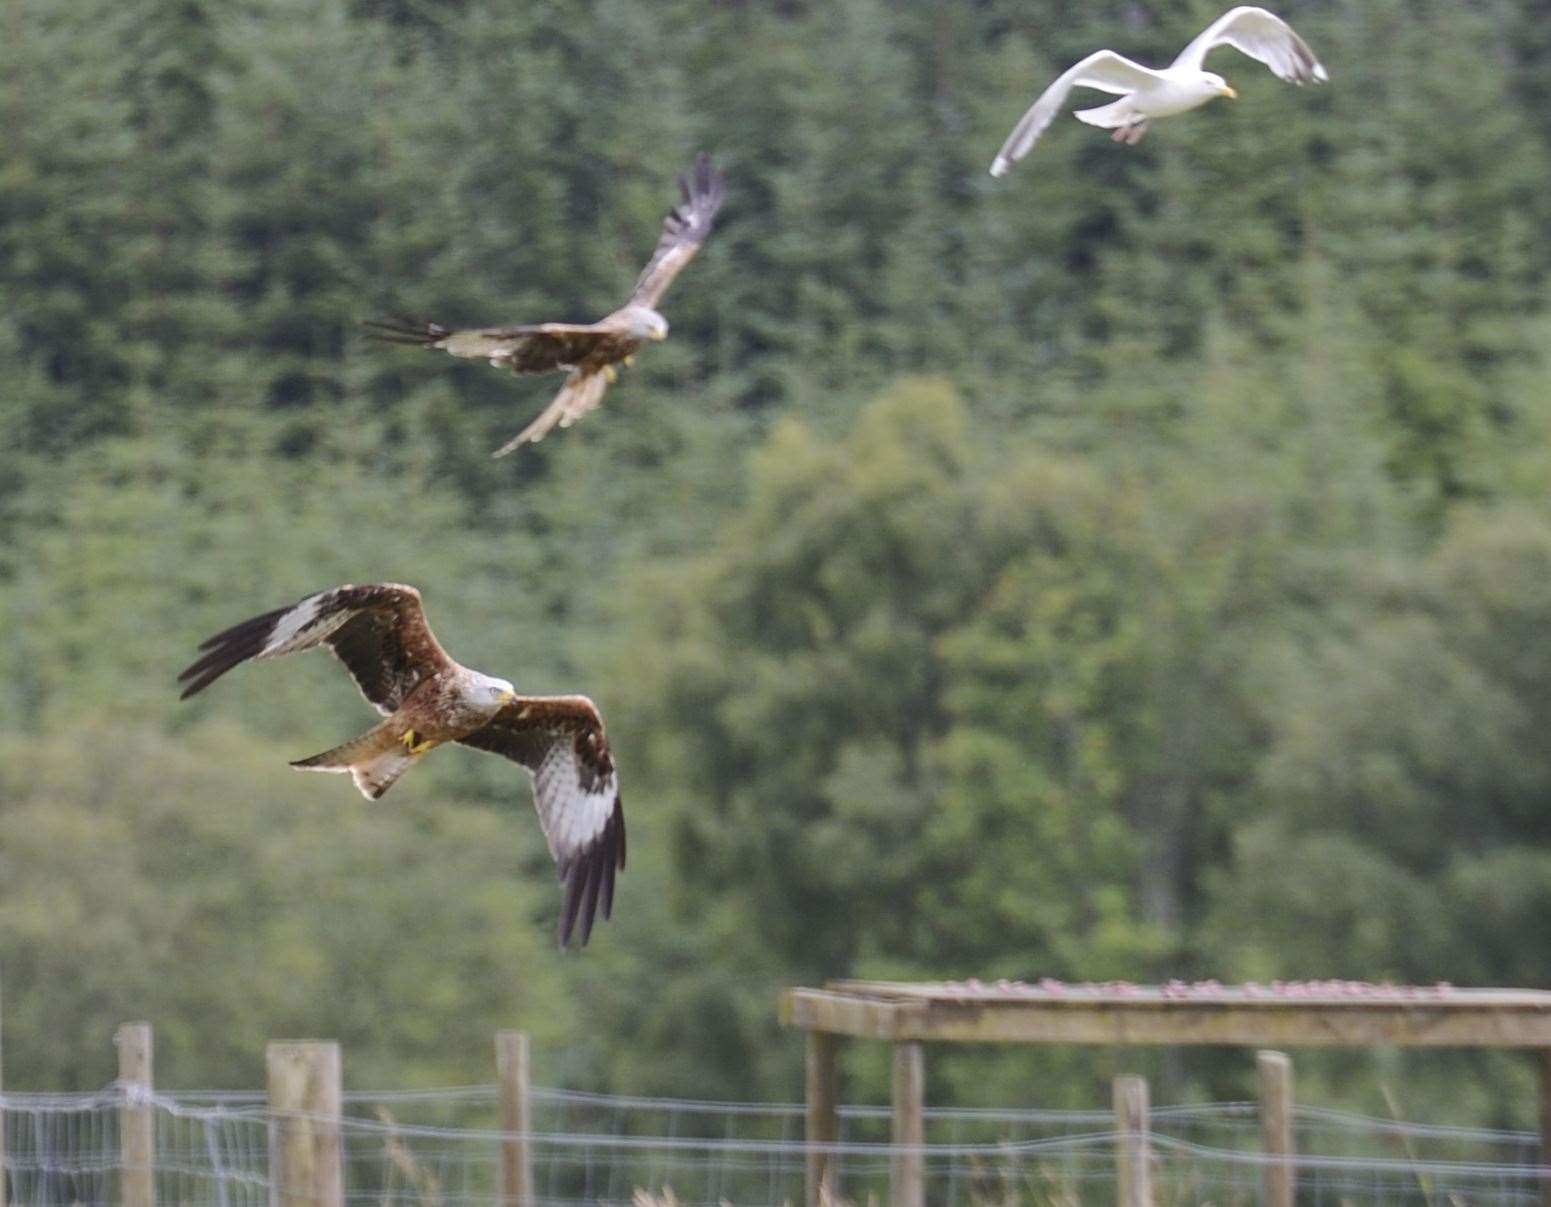 Red kites in the wild.